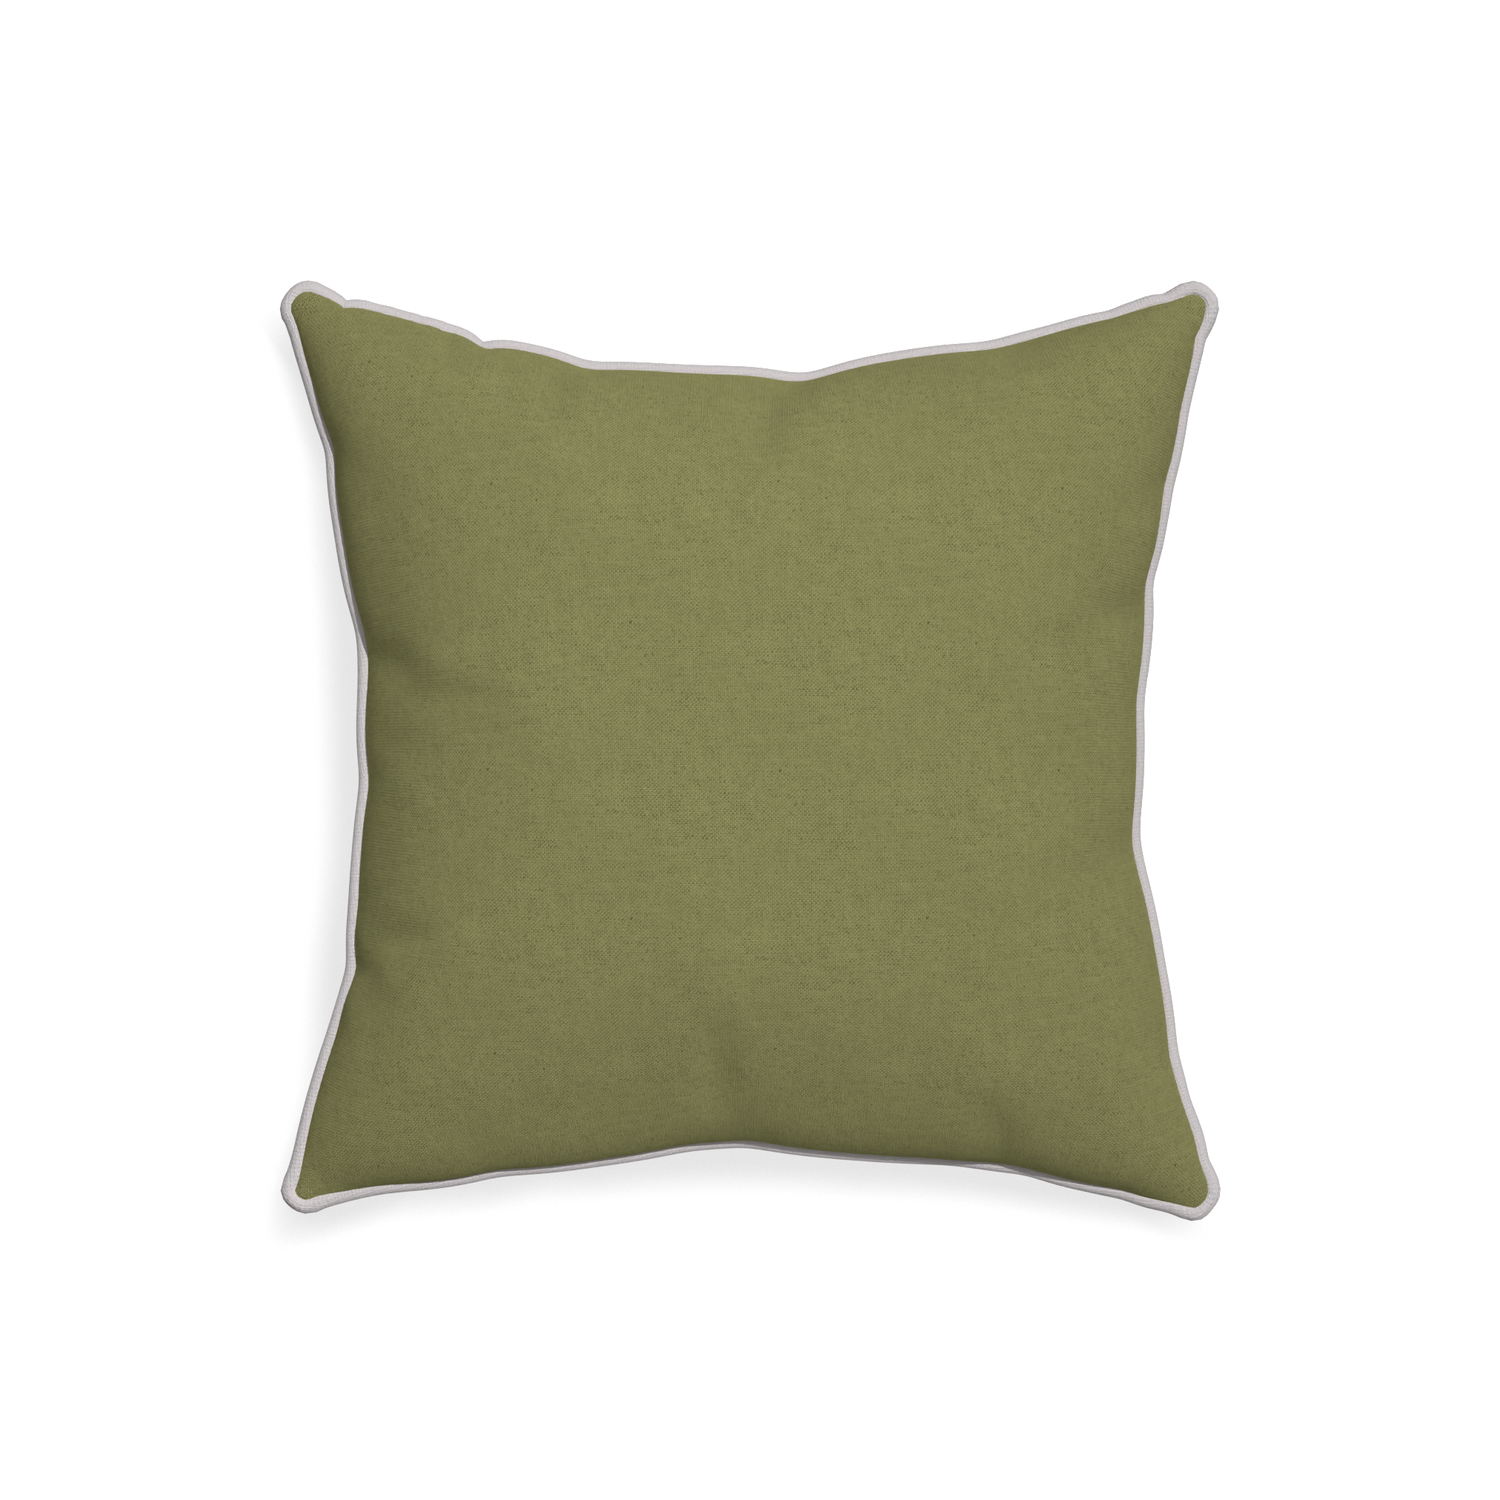 20-square moss custom moss greenpillow with pebble piping on white background